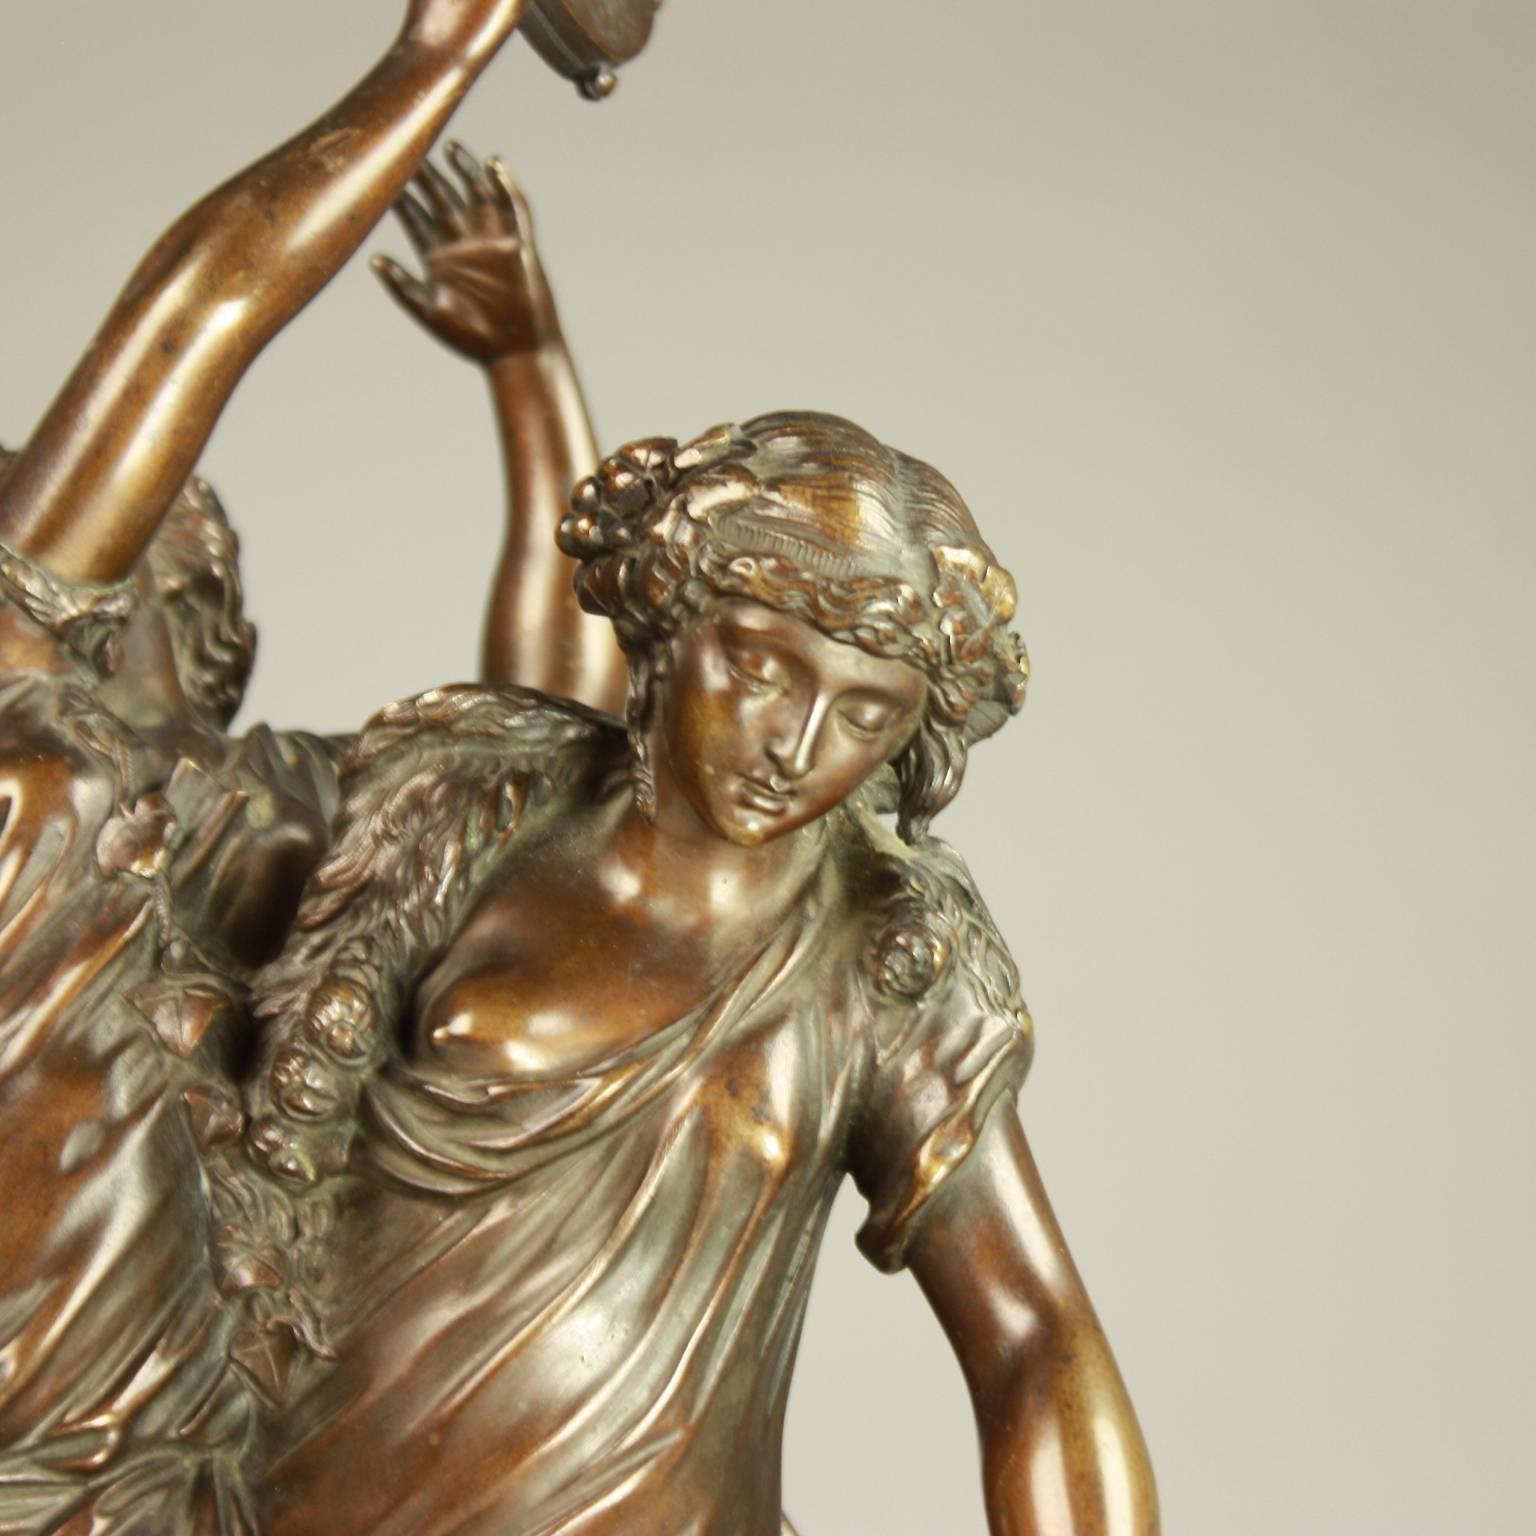 French Patinated Bronze Sculpture of Bacchanalia, after Clodion (Rokoko)